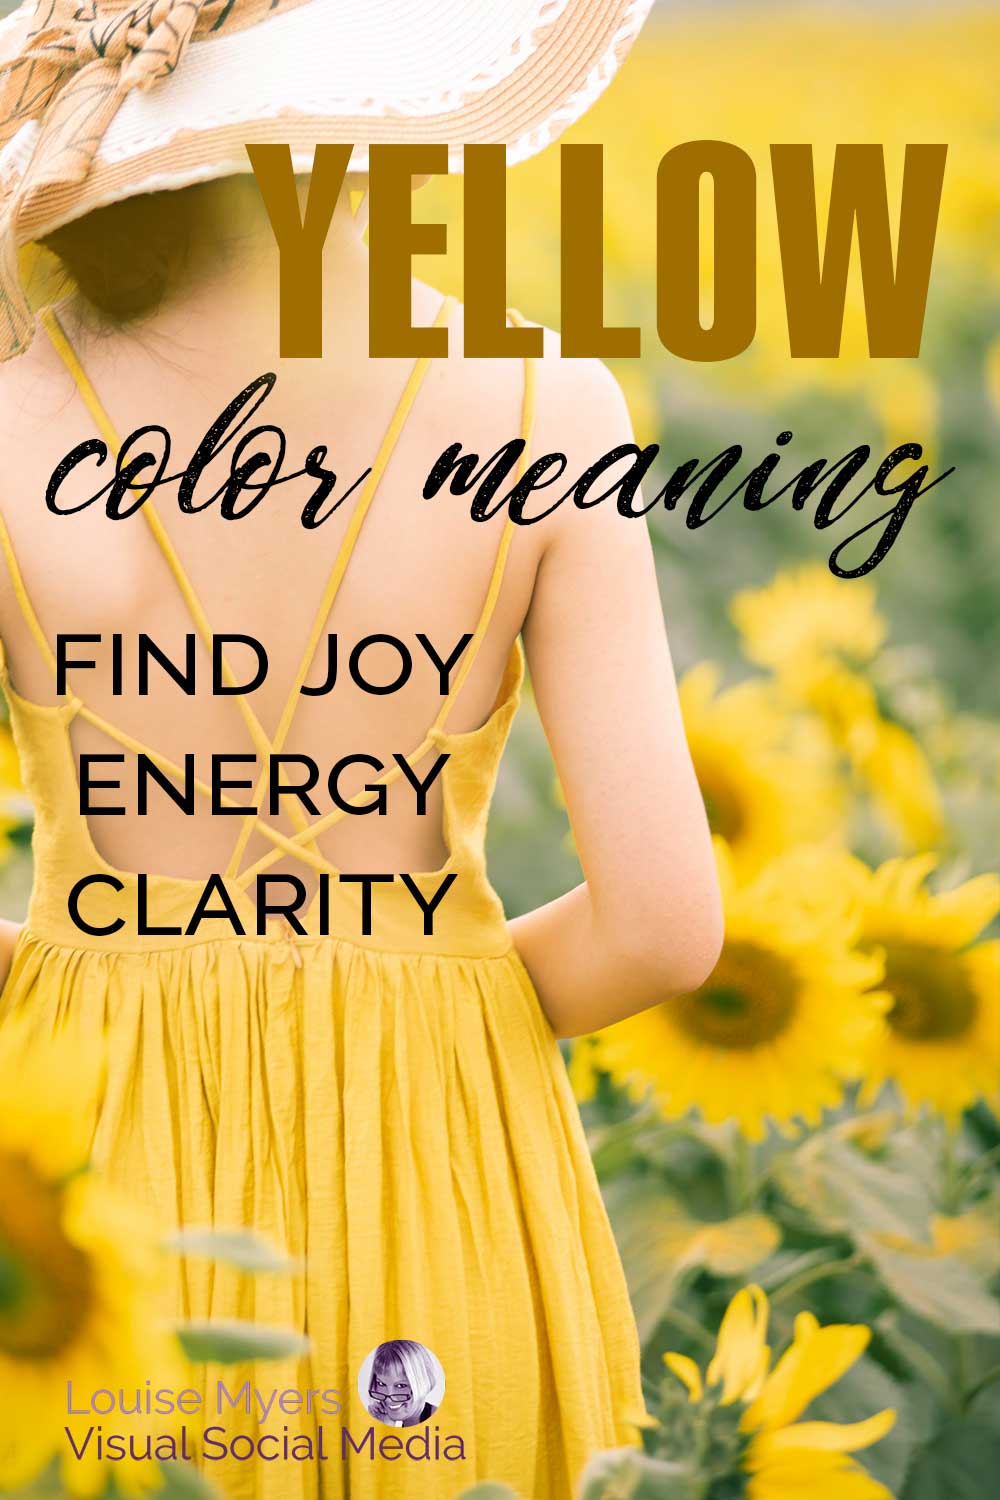 woman in yellow sundress stands in field of sunflowers with text yellow color meaning, find joy, energy, clarity.